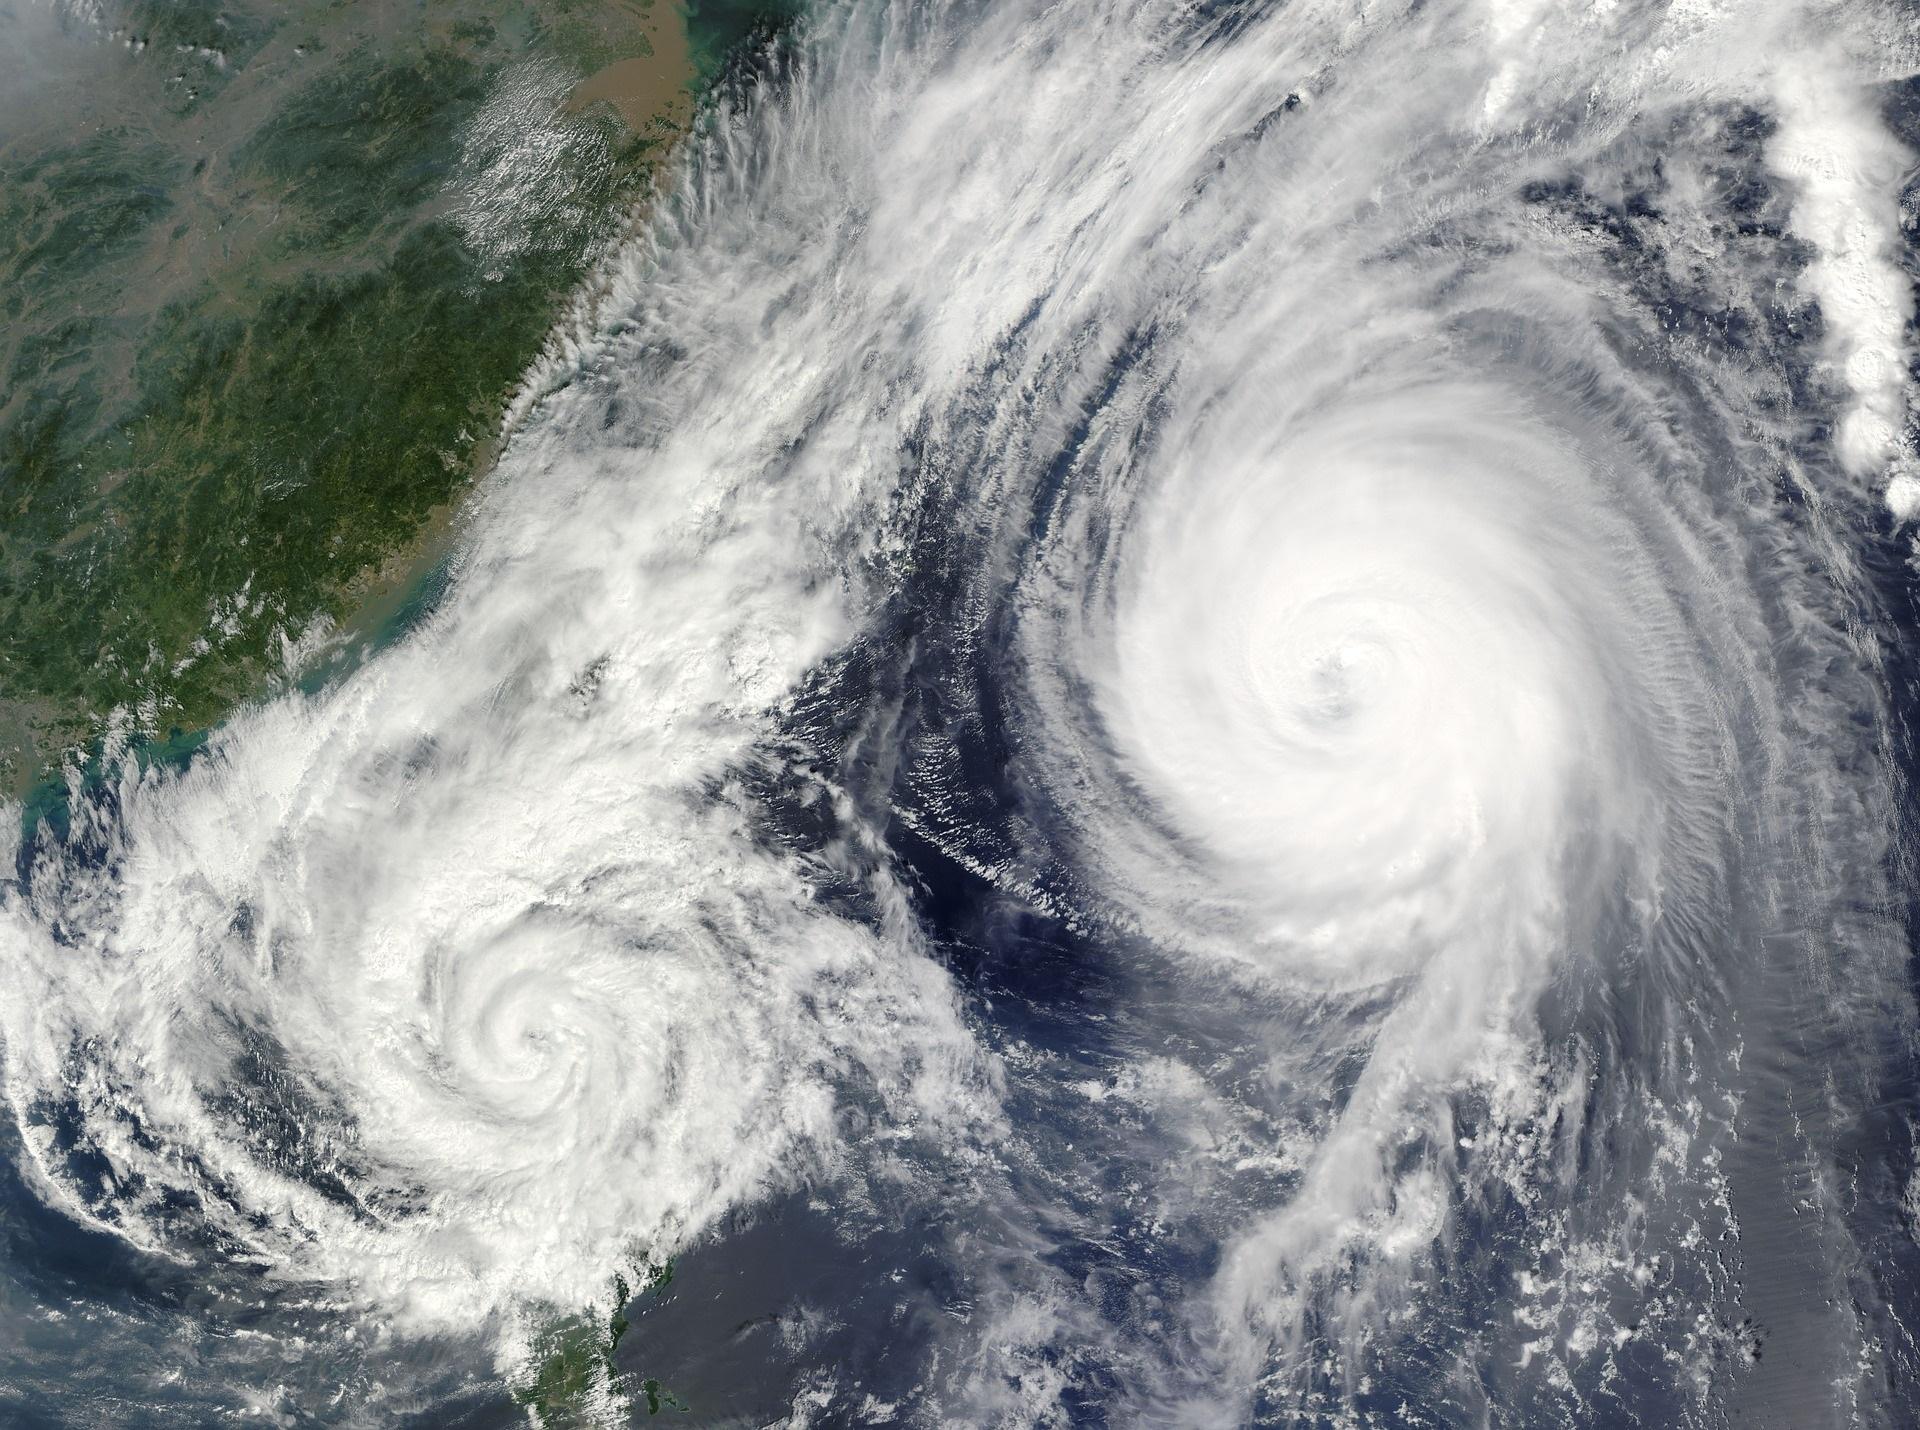 hurricanes increase in intensity with climate change